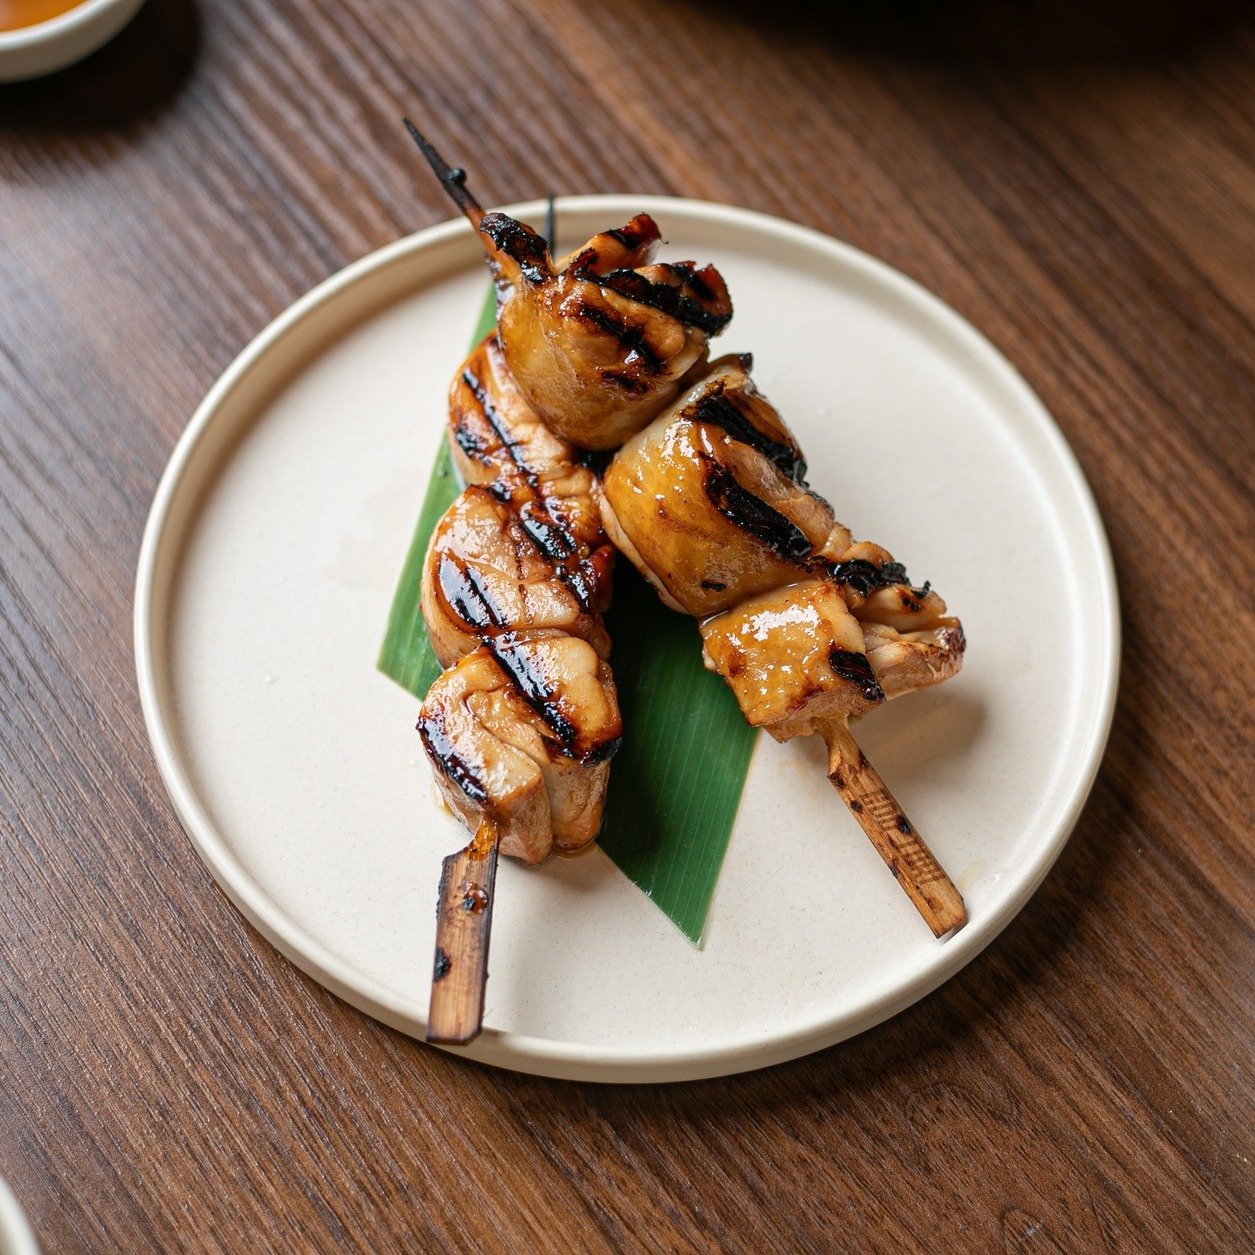 Savour the smoky goodness of our Yakitori chicken skewers! 

2 chargrilled chicken thigh skewers, bursting with flavour and guaranteed to leave you craving more.

#ChopChop #Canberra #Restaurant